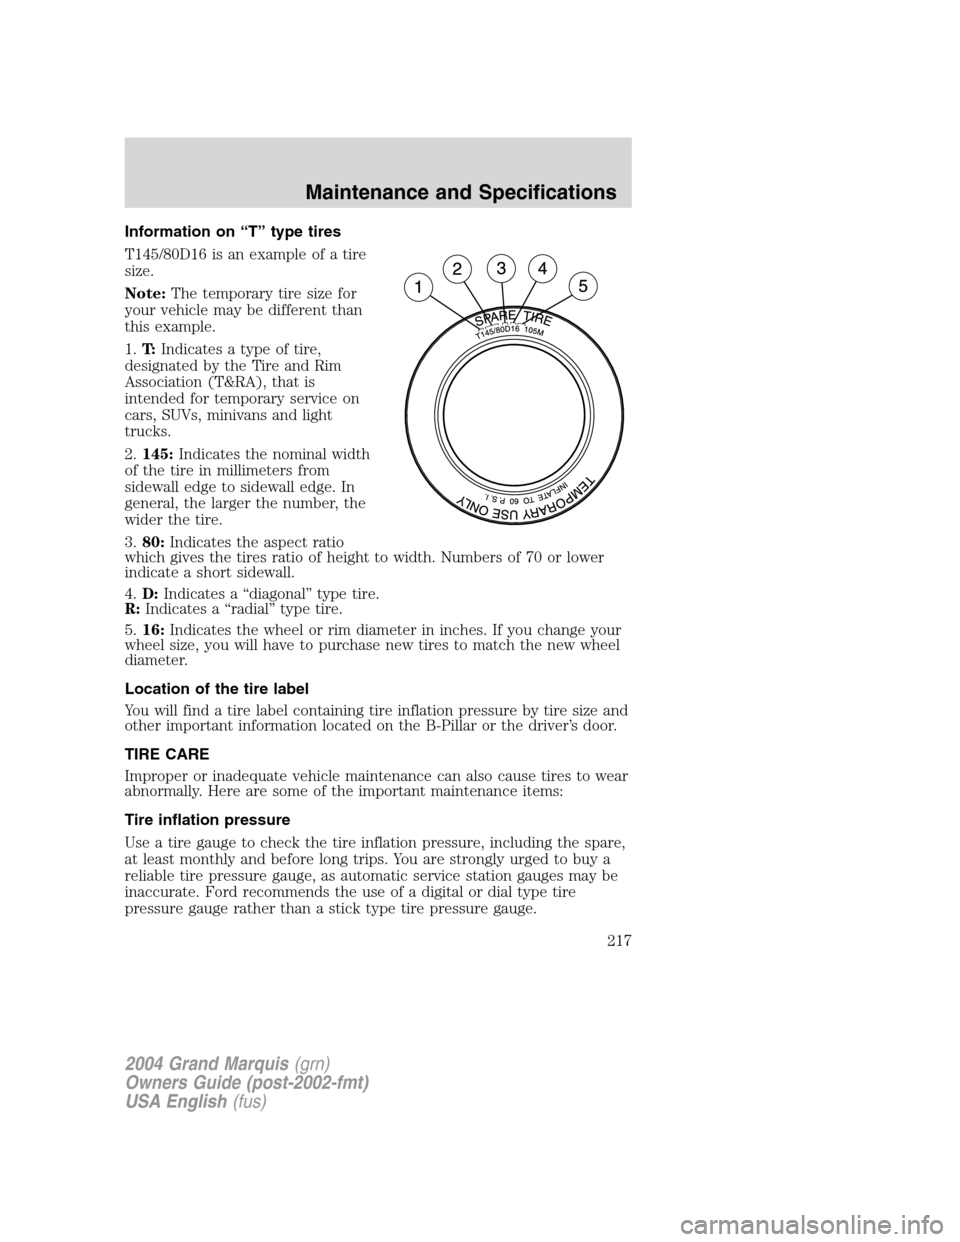 Mercury Grand Marquis 2004  s User Guide Information on“T”type tires
T145/80D16 is an example of a tire
size.
Note:The temporary tire size for
your vehicle may be different than
this example.
1.T:Indicates a type of tire,
designated by t